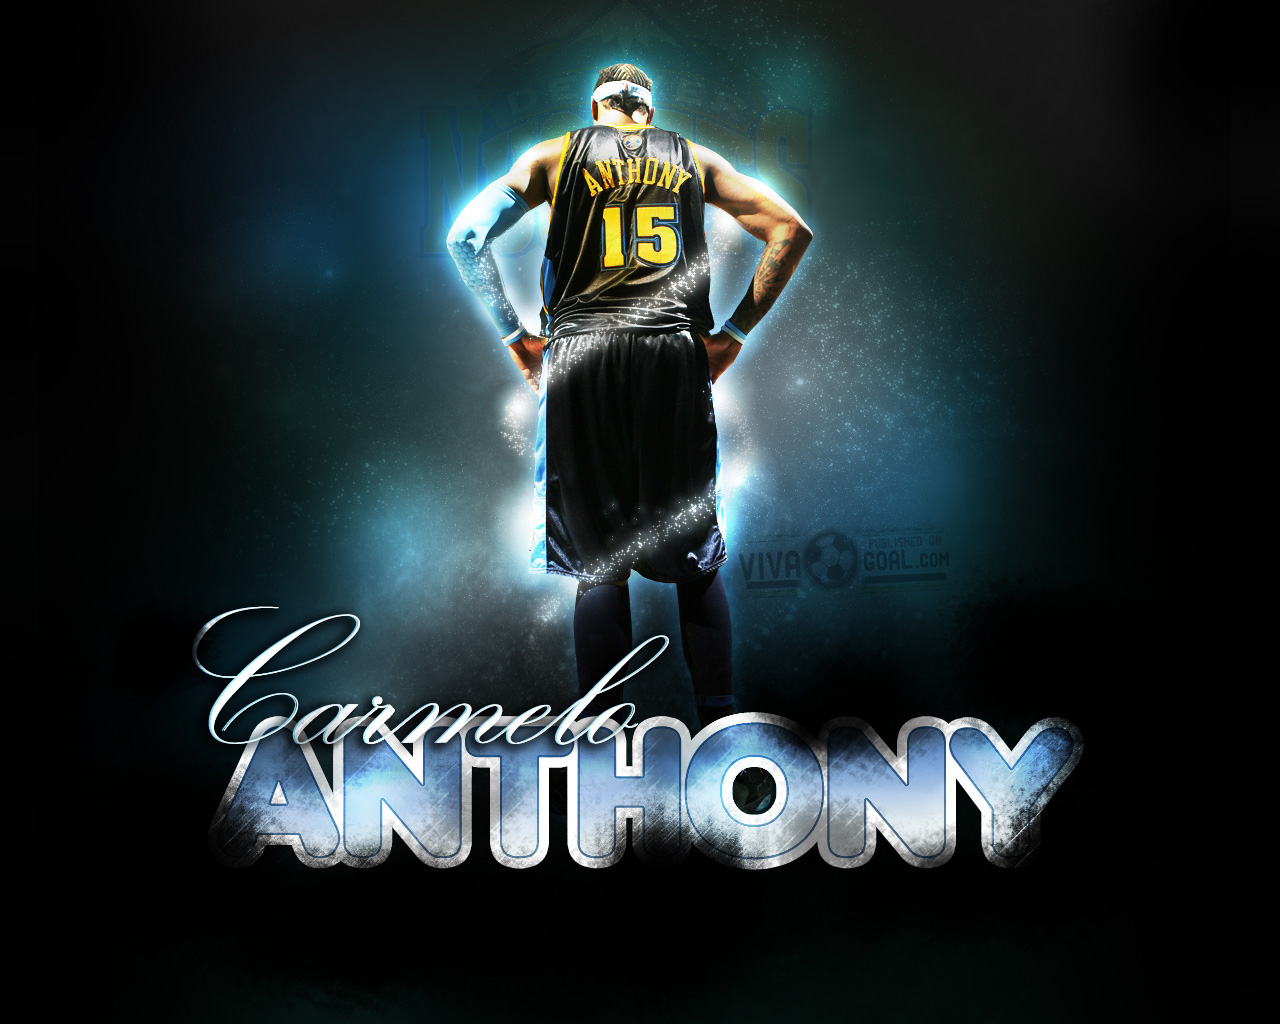 Carmelo Anthony Basketball Wallpapers Carmelo Anthony